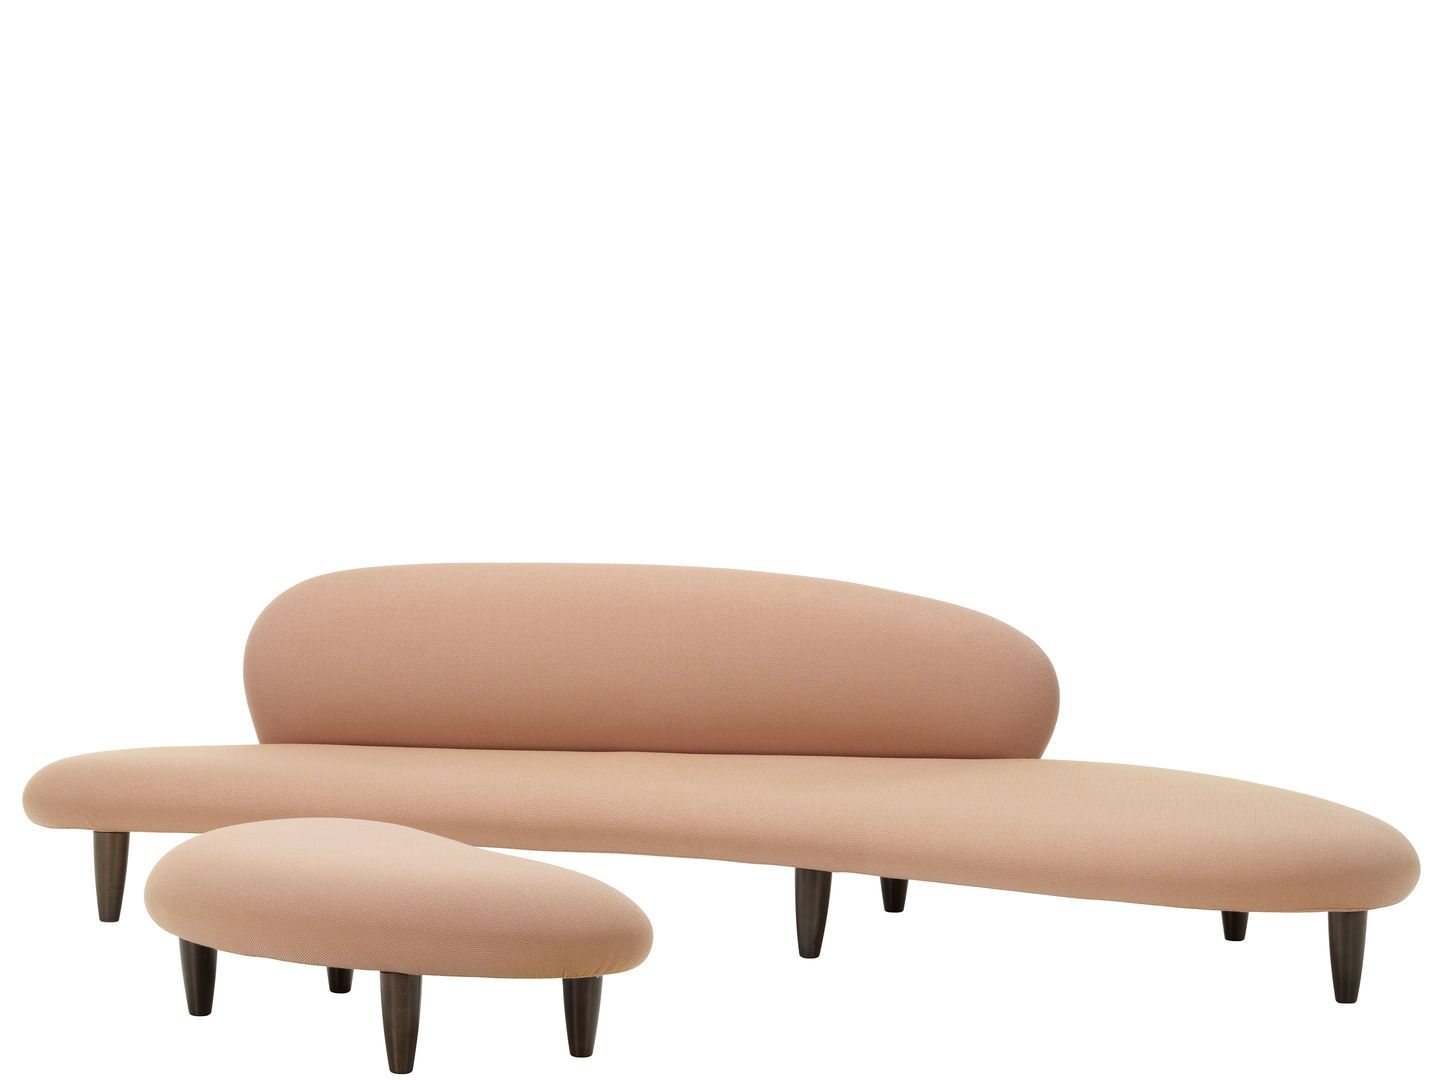  Vitra Freeform Sofa and Ottoman from One52 Furniture